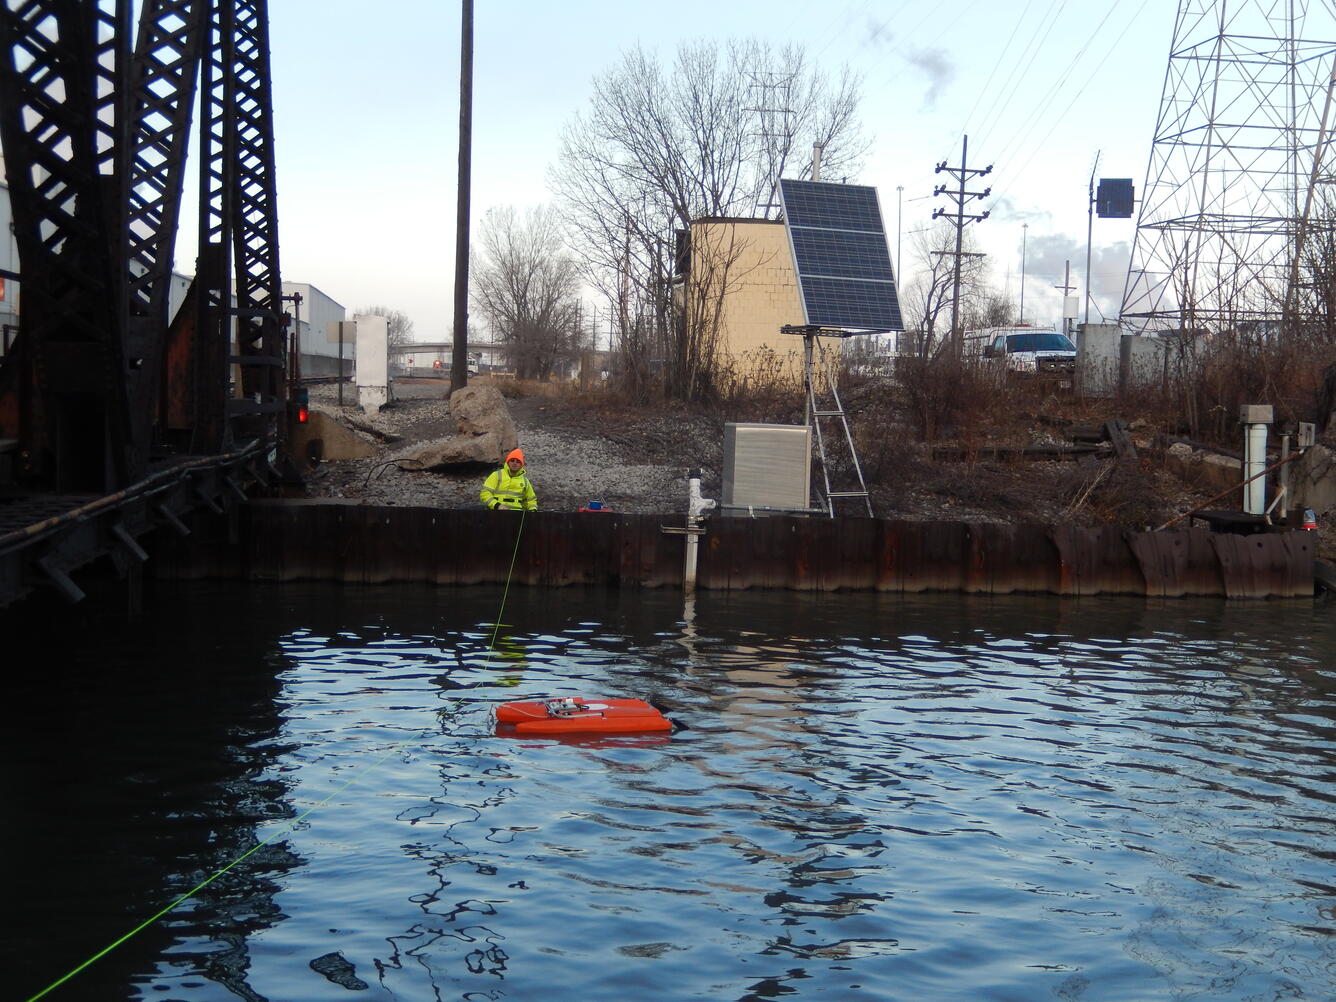 Indiana Harbor Canal at East Chicago, IN  ADCP boat measurement